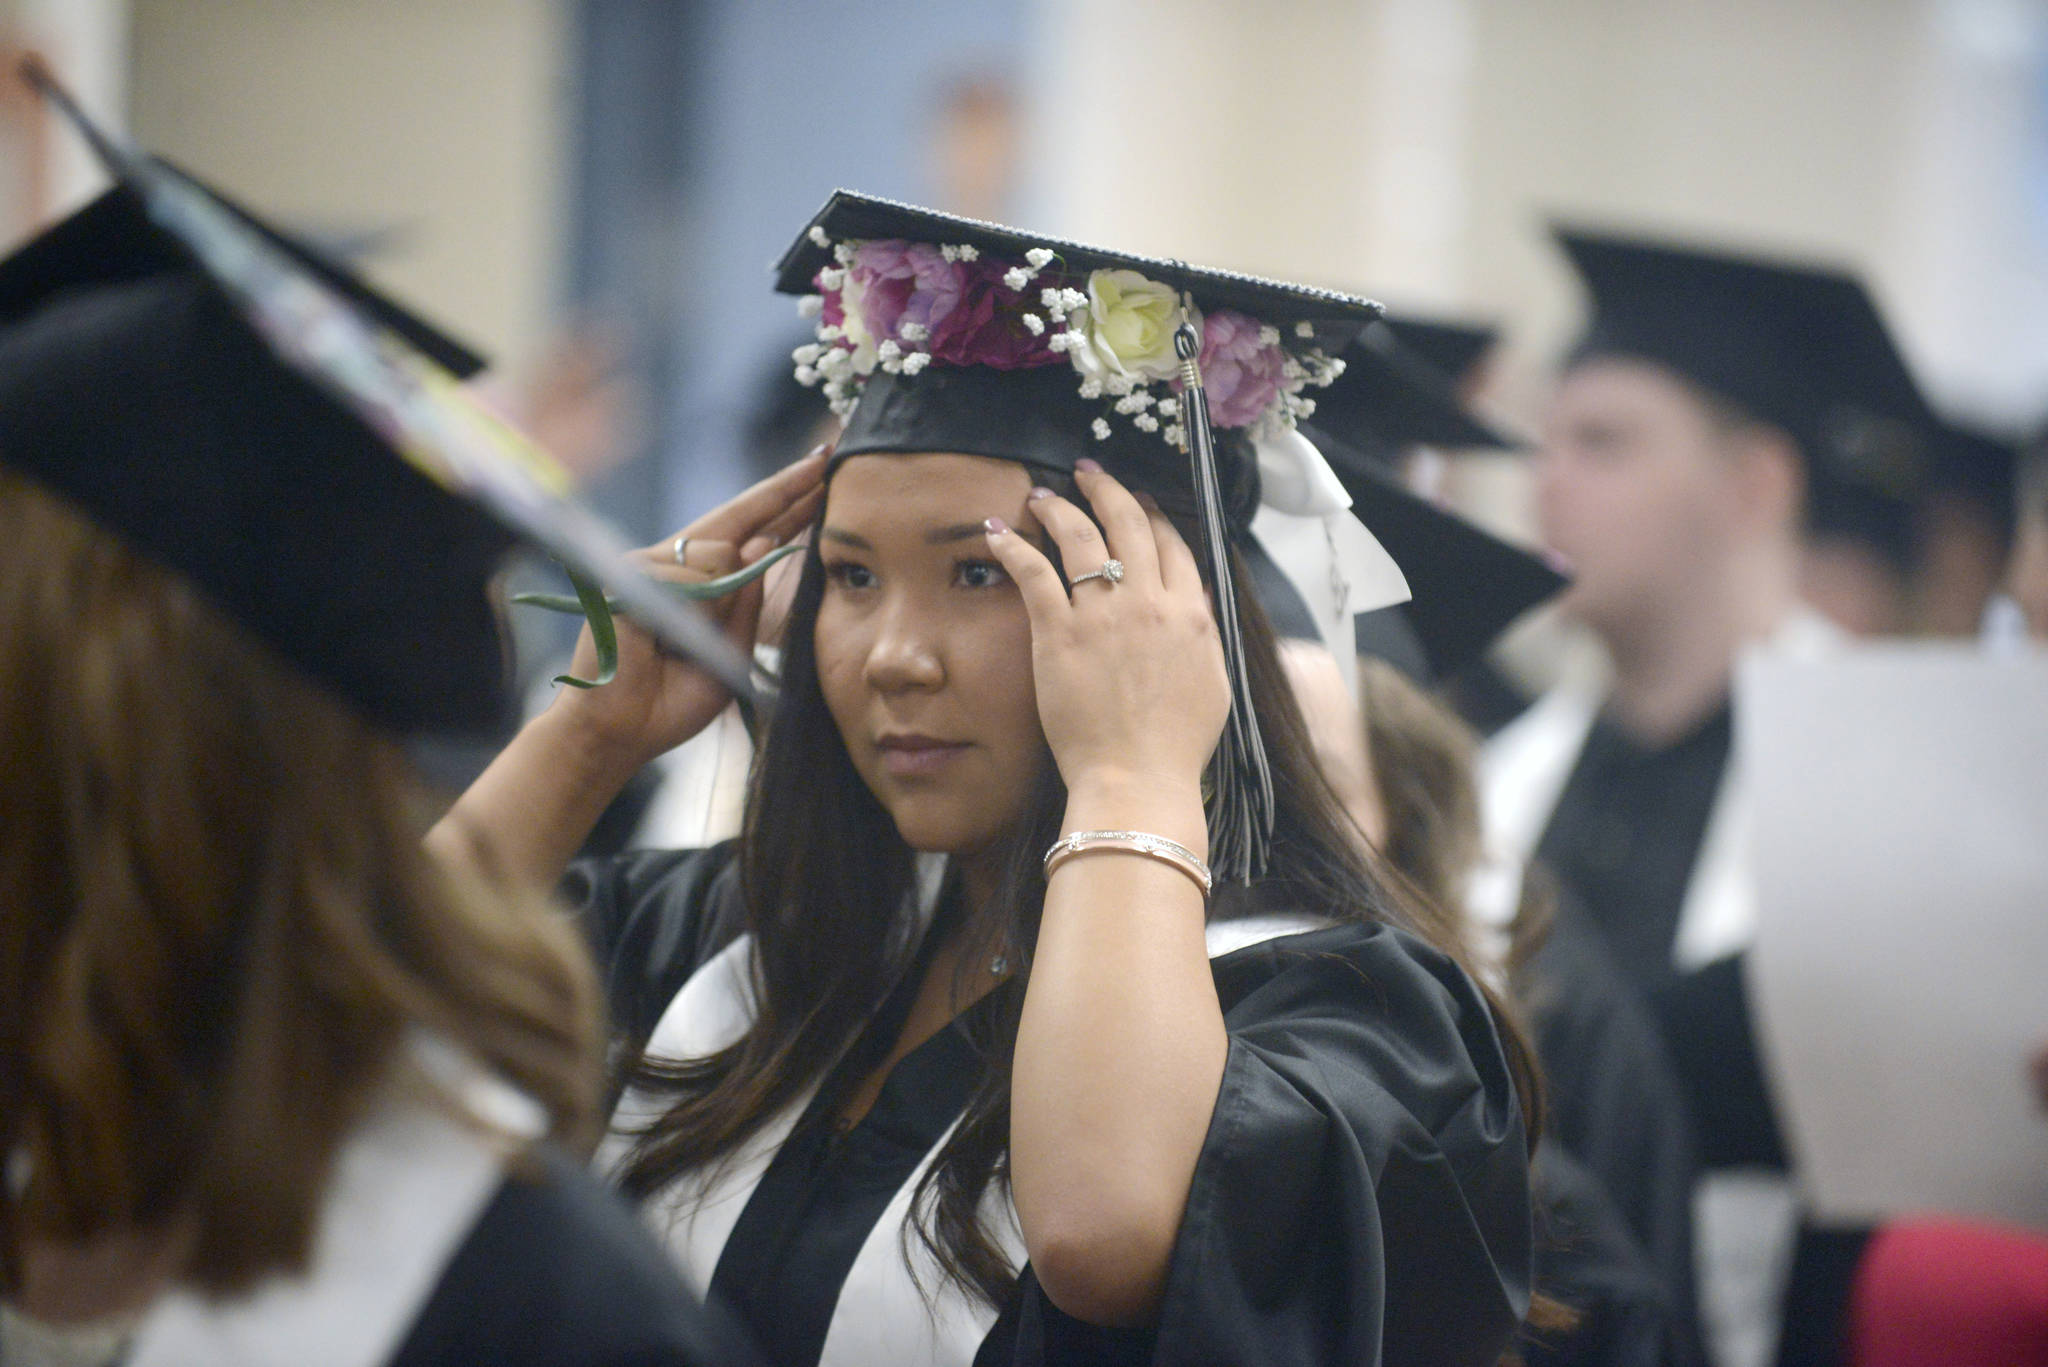 Graduates wait to enter the Nikiski High School auditorium ahead of the 2018 commencement ceremony. (Photo by Erin Thompson/Peninsula Clarion)